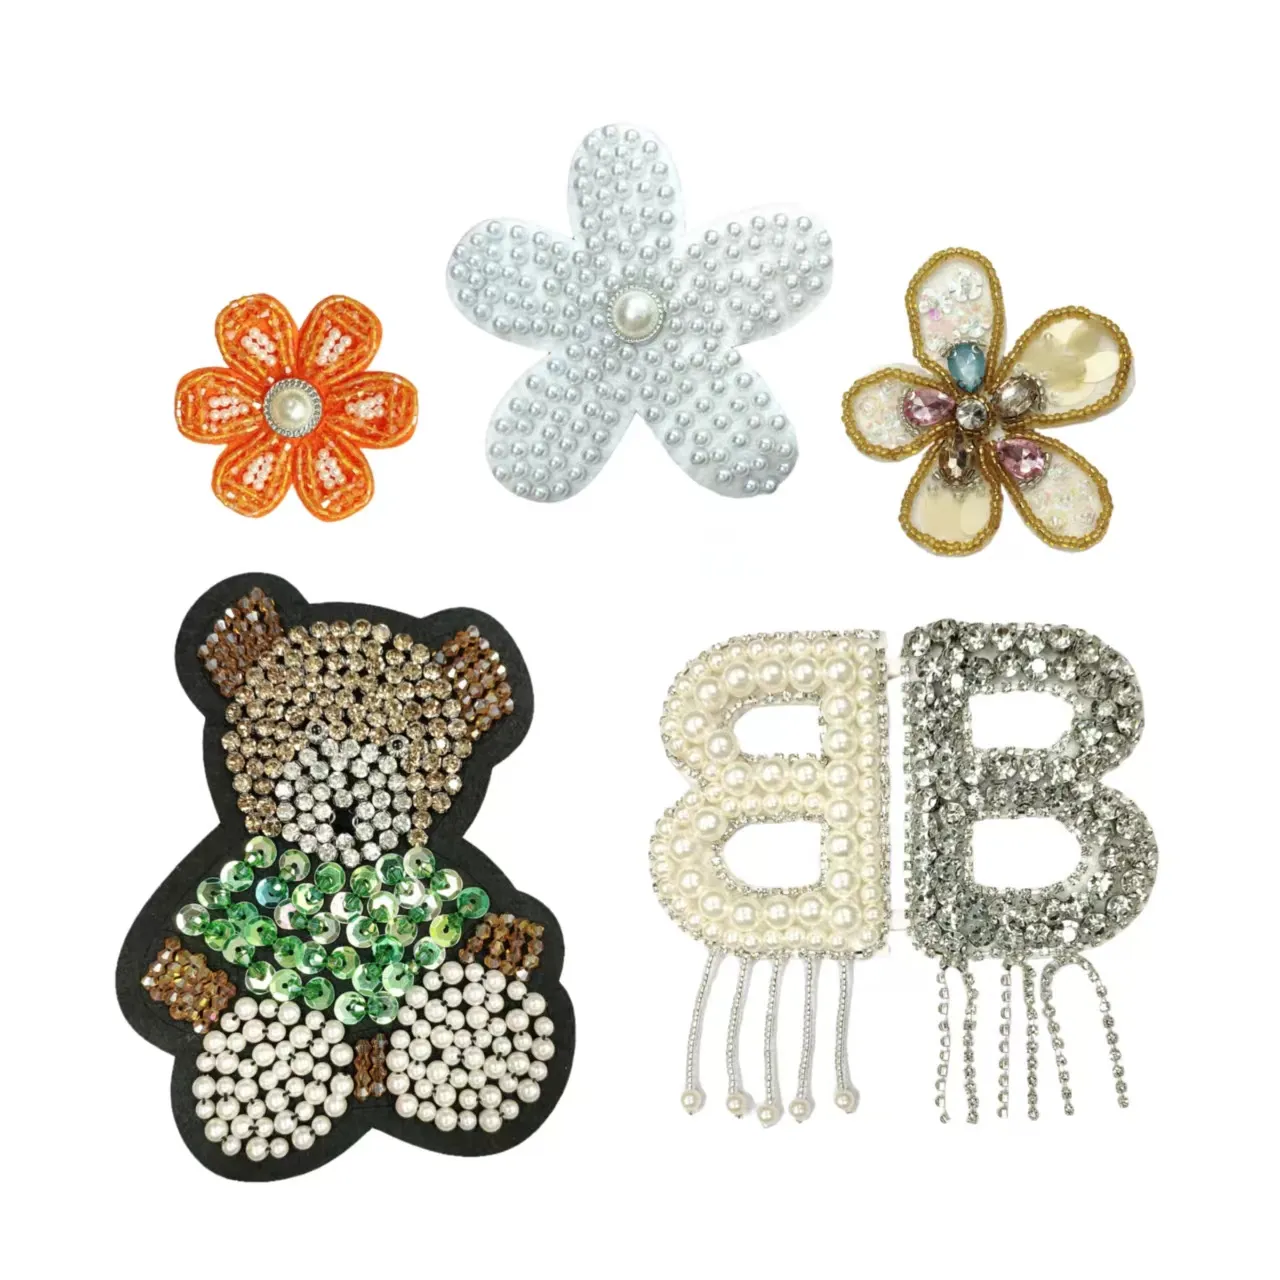 Cute 3D Flamingo Animal Sequin Patch Iron-On Beaded Diamond Applique with Fluffy Feathers Rhinestone Decor for Bags Clothing